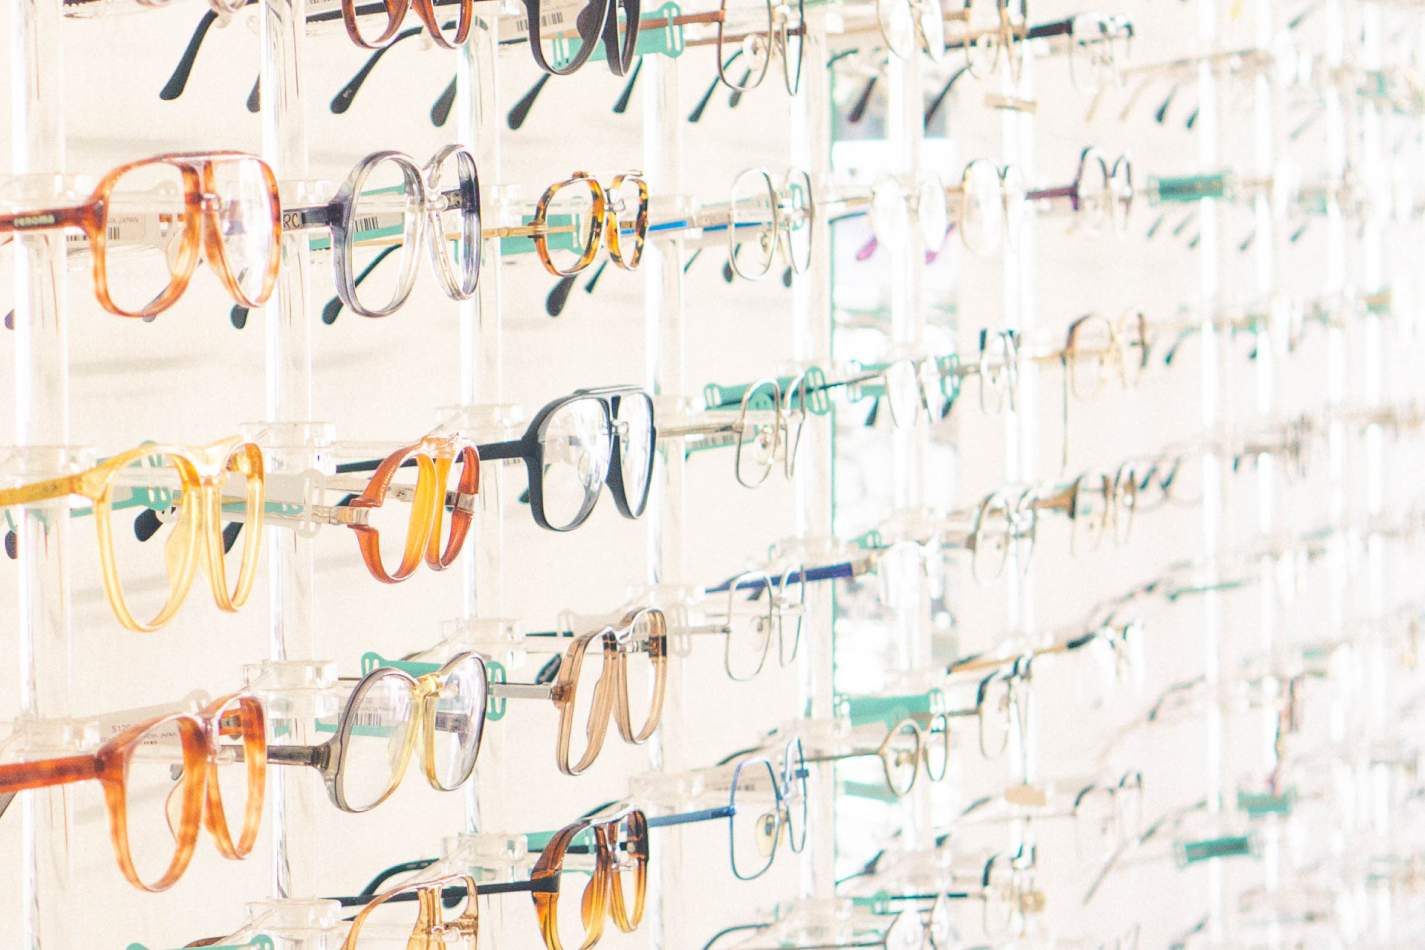 A wall display of funky vintages eyeglasses of all colors.